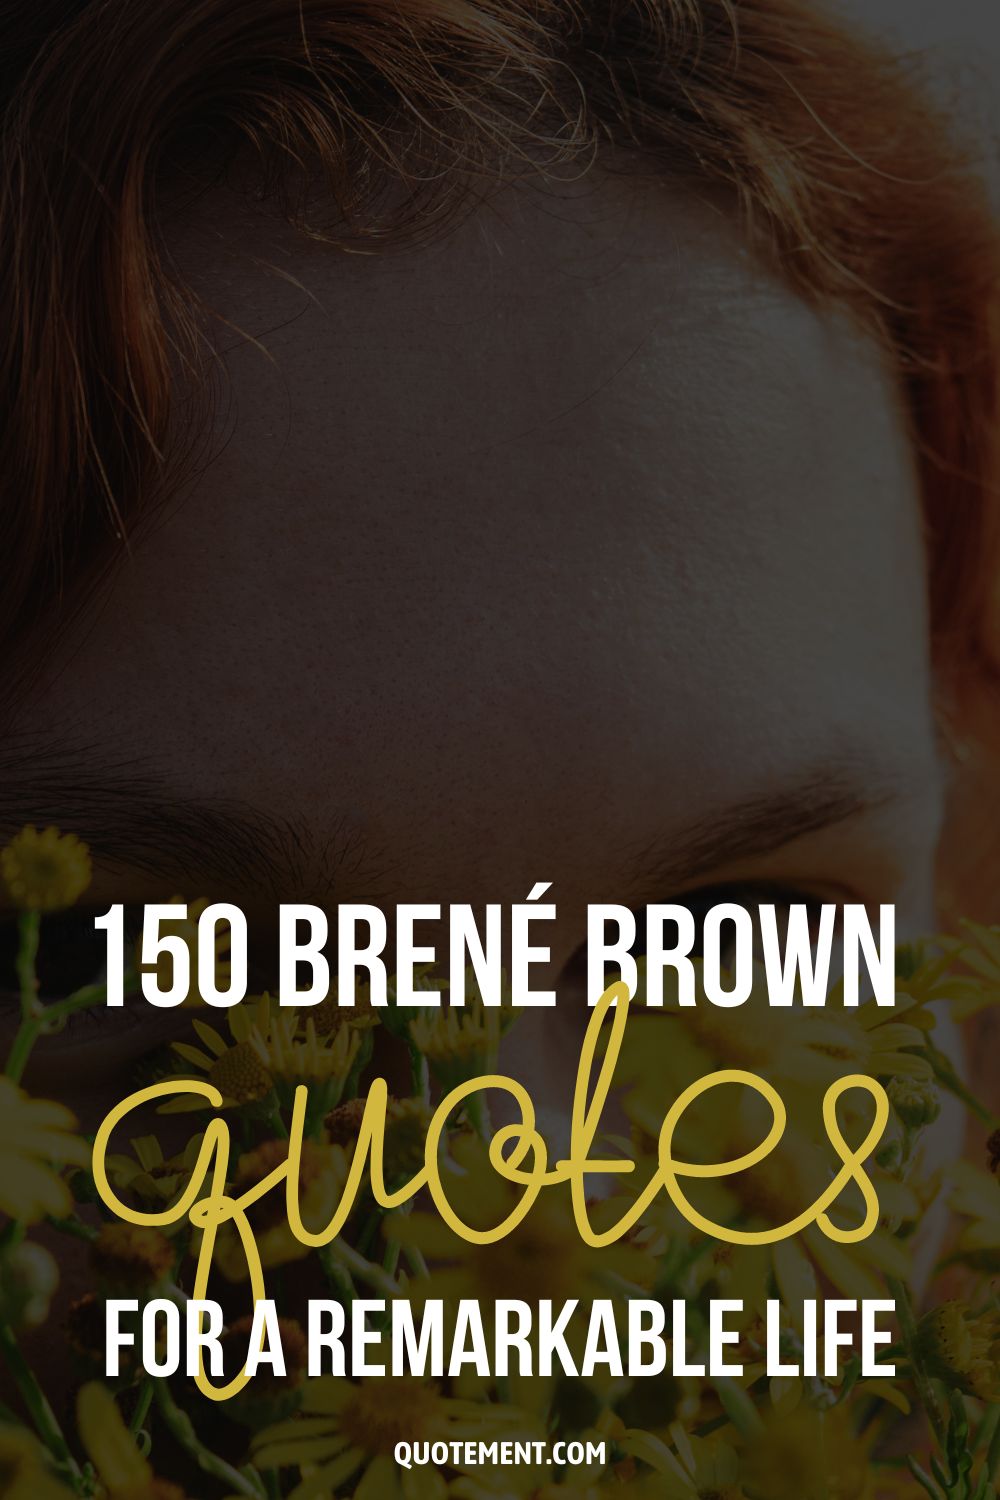 150 Greatest Brené Brown Quotes For A Wholehearted Life 